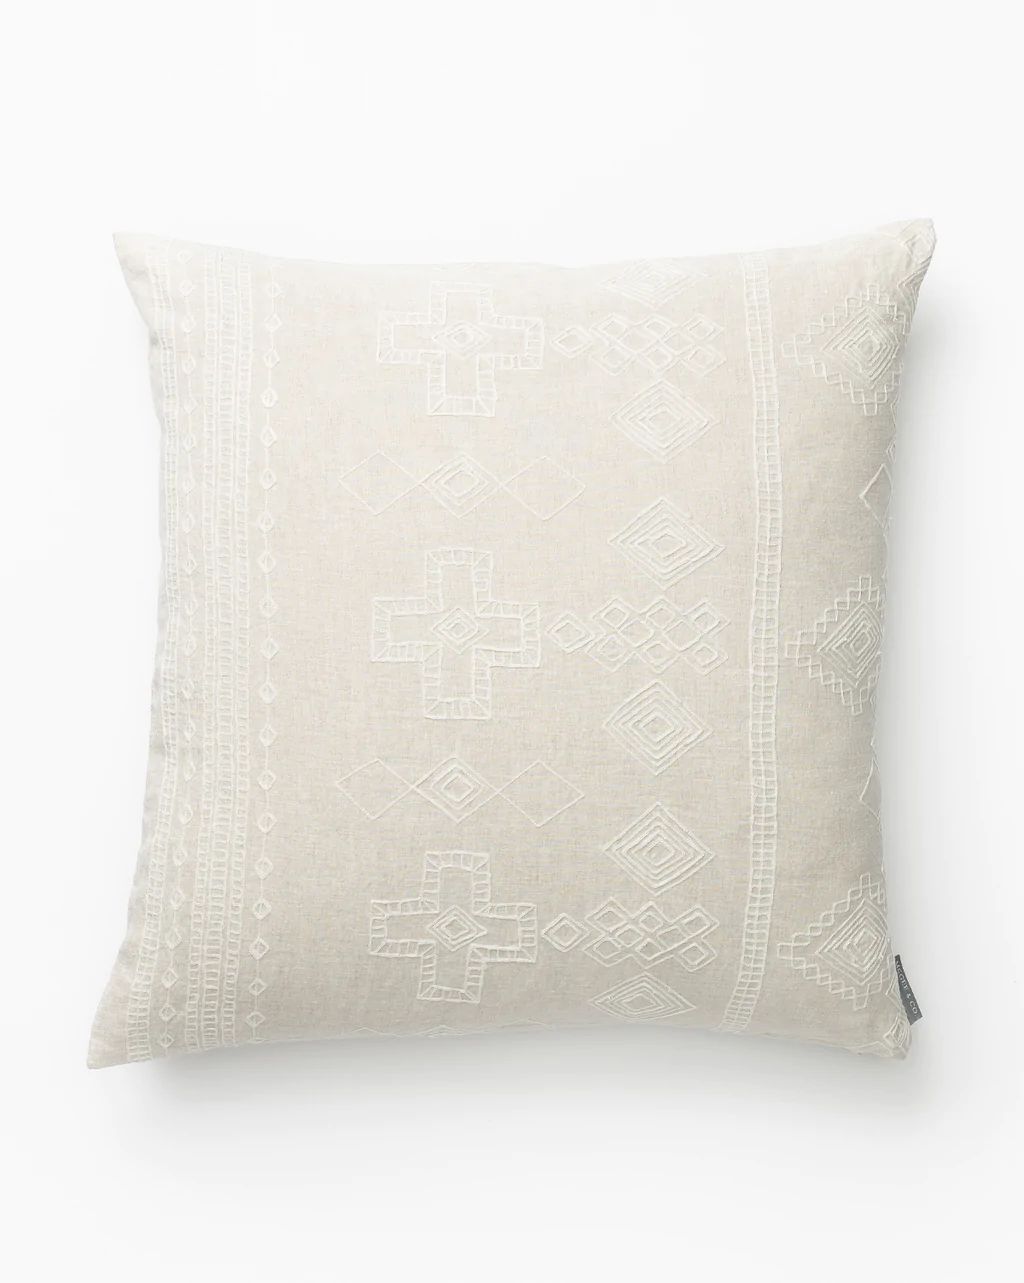 Jamille Woven Pillow Cover | McGee & Co.